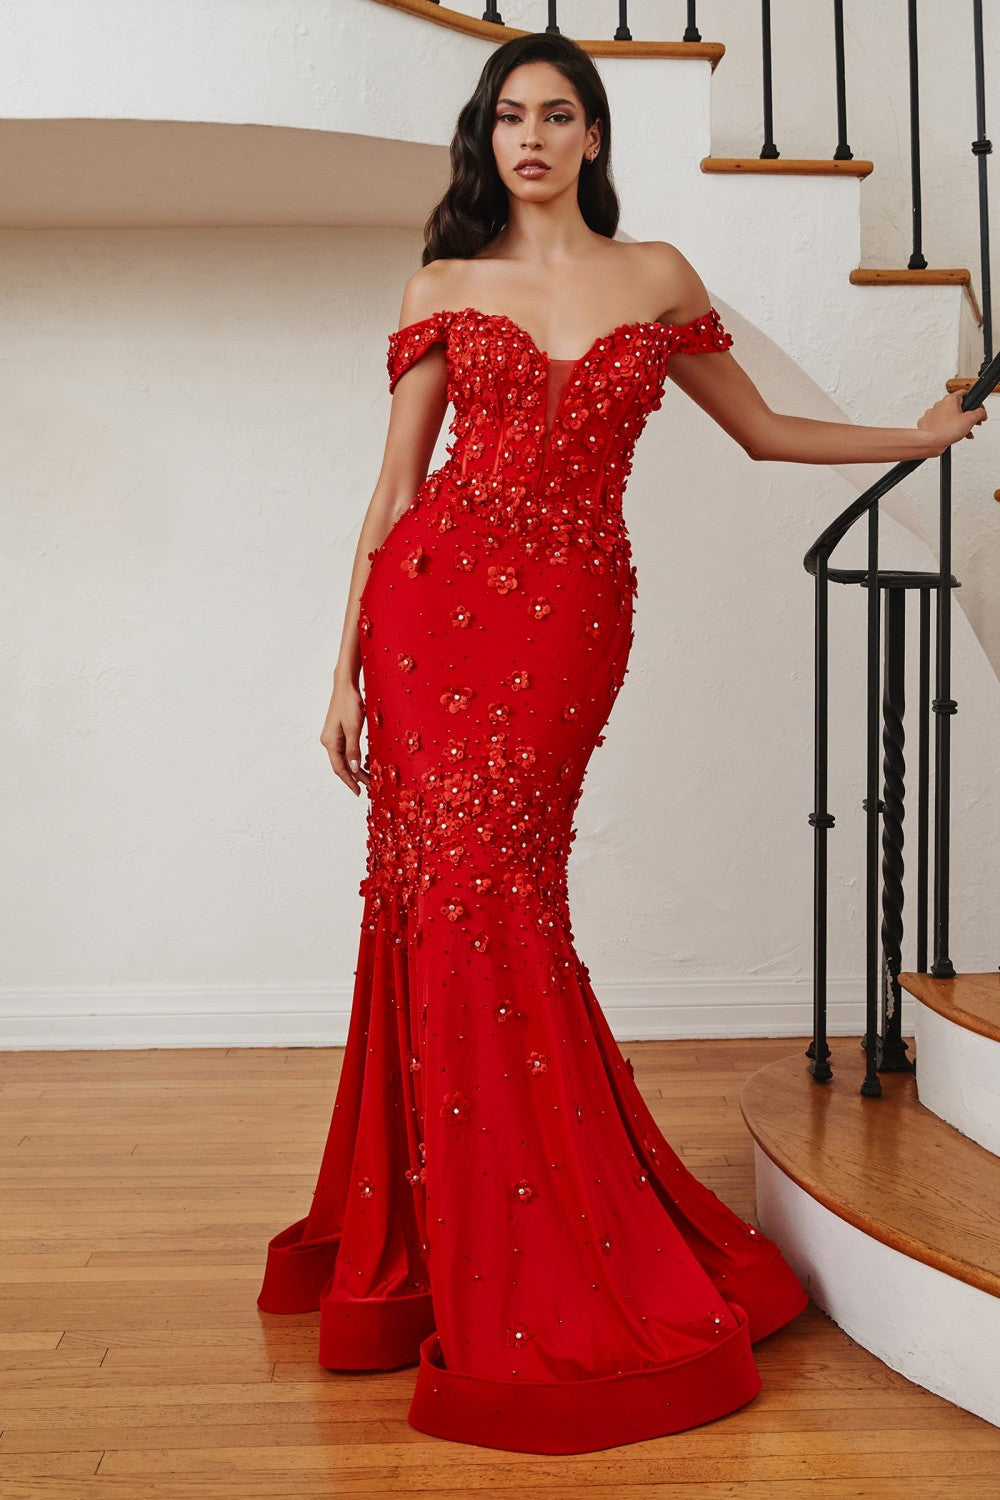 Red Floral Off The Shoulder Gown CC2171 - Women Evening Formal Gown - Special Occasion